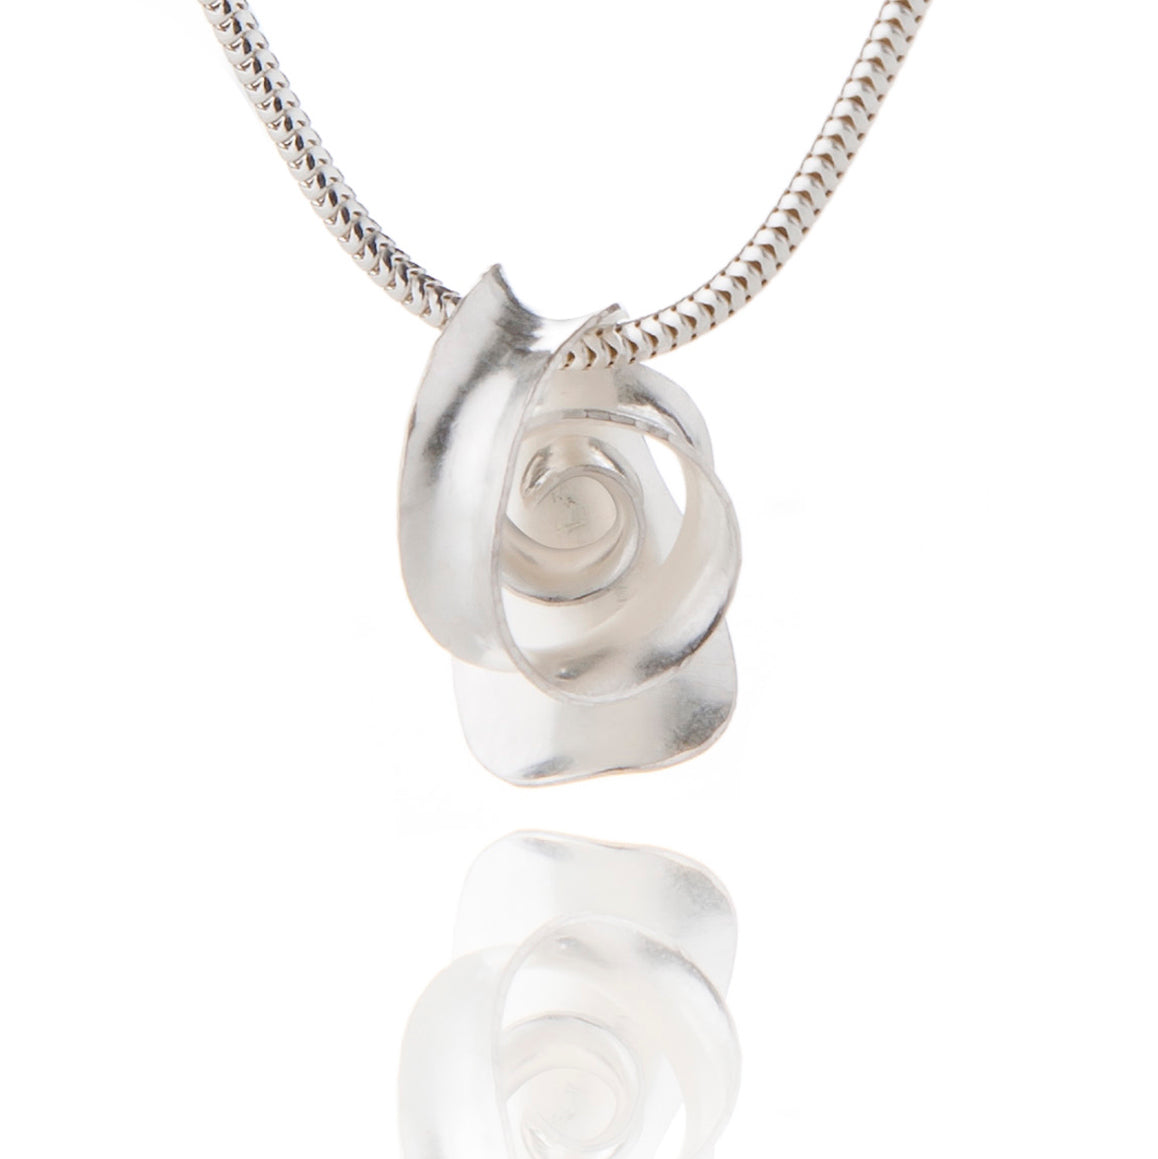 A small spiral pendant handmade from recycled sterling silver. A ribbon of metal loops and twists over from the base and forms a spiral.